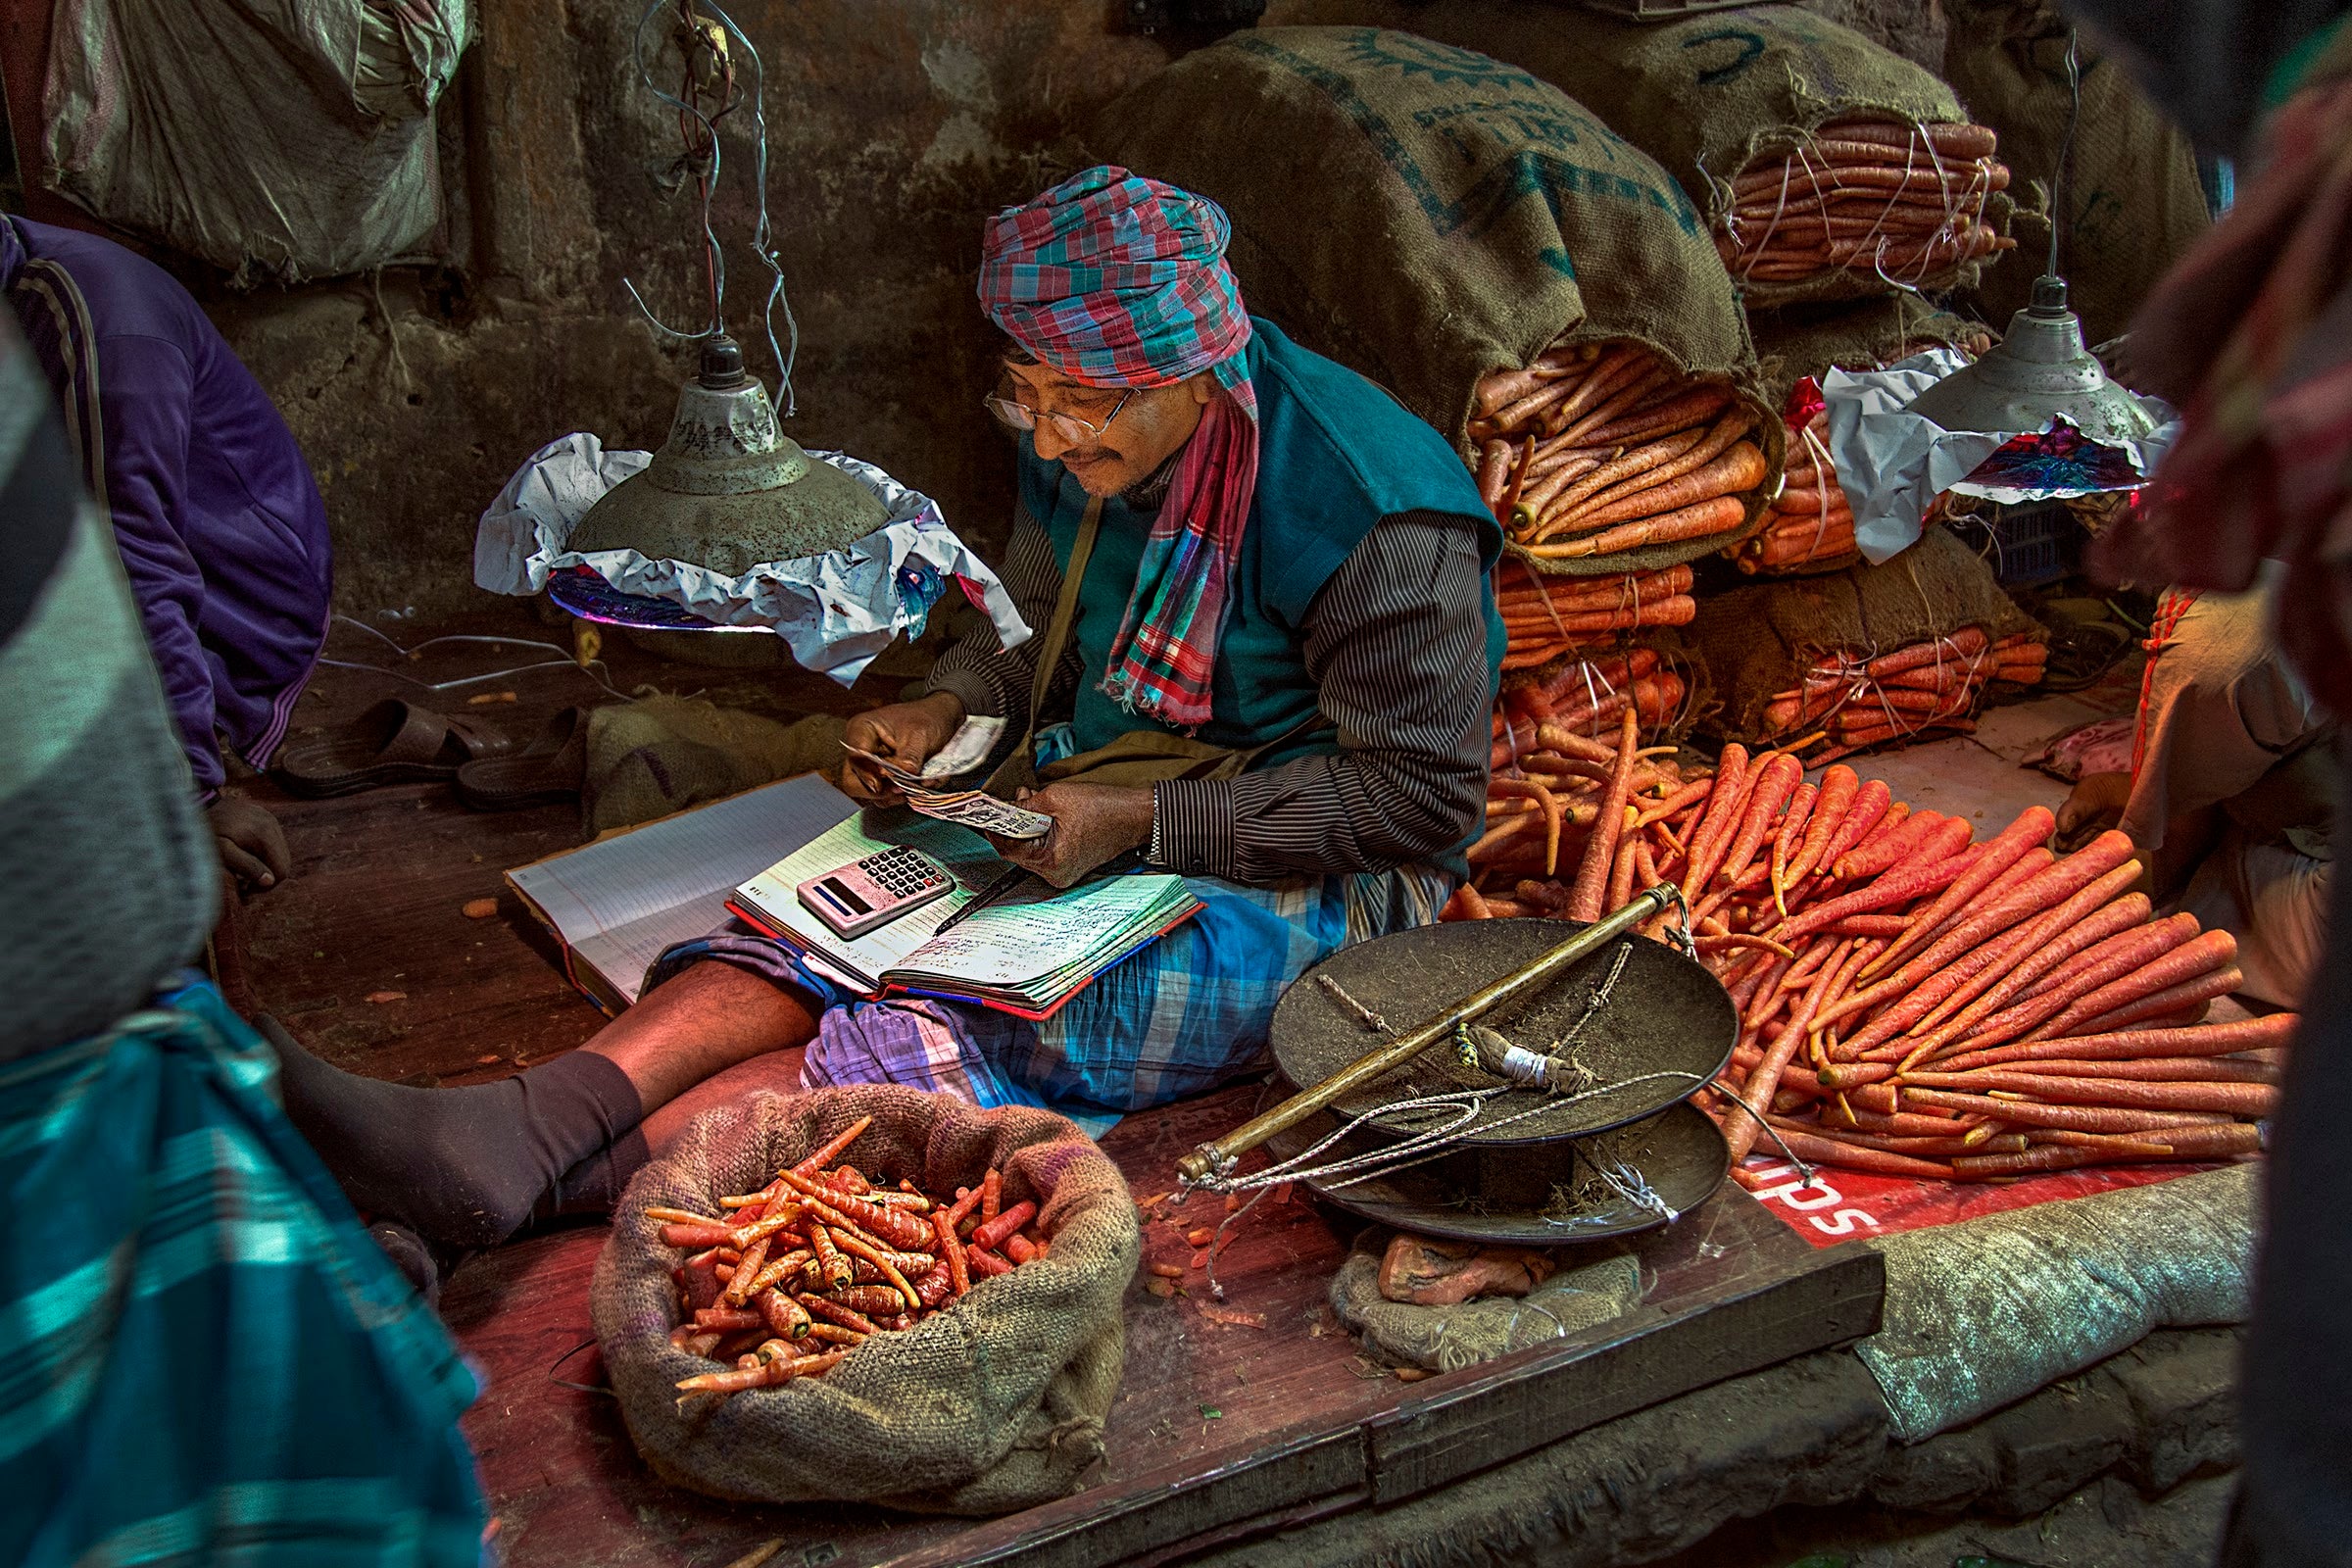 A carrot merchant in India counts his cash at the end of the day. Photo: Subrata Adhikary, 2017 CGAP Photo Contest